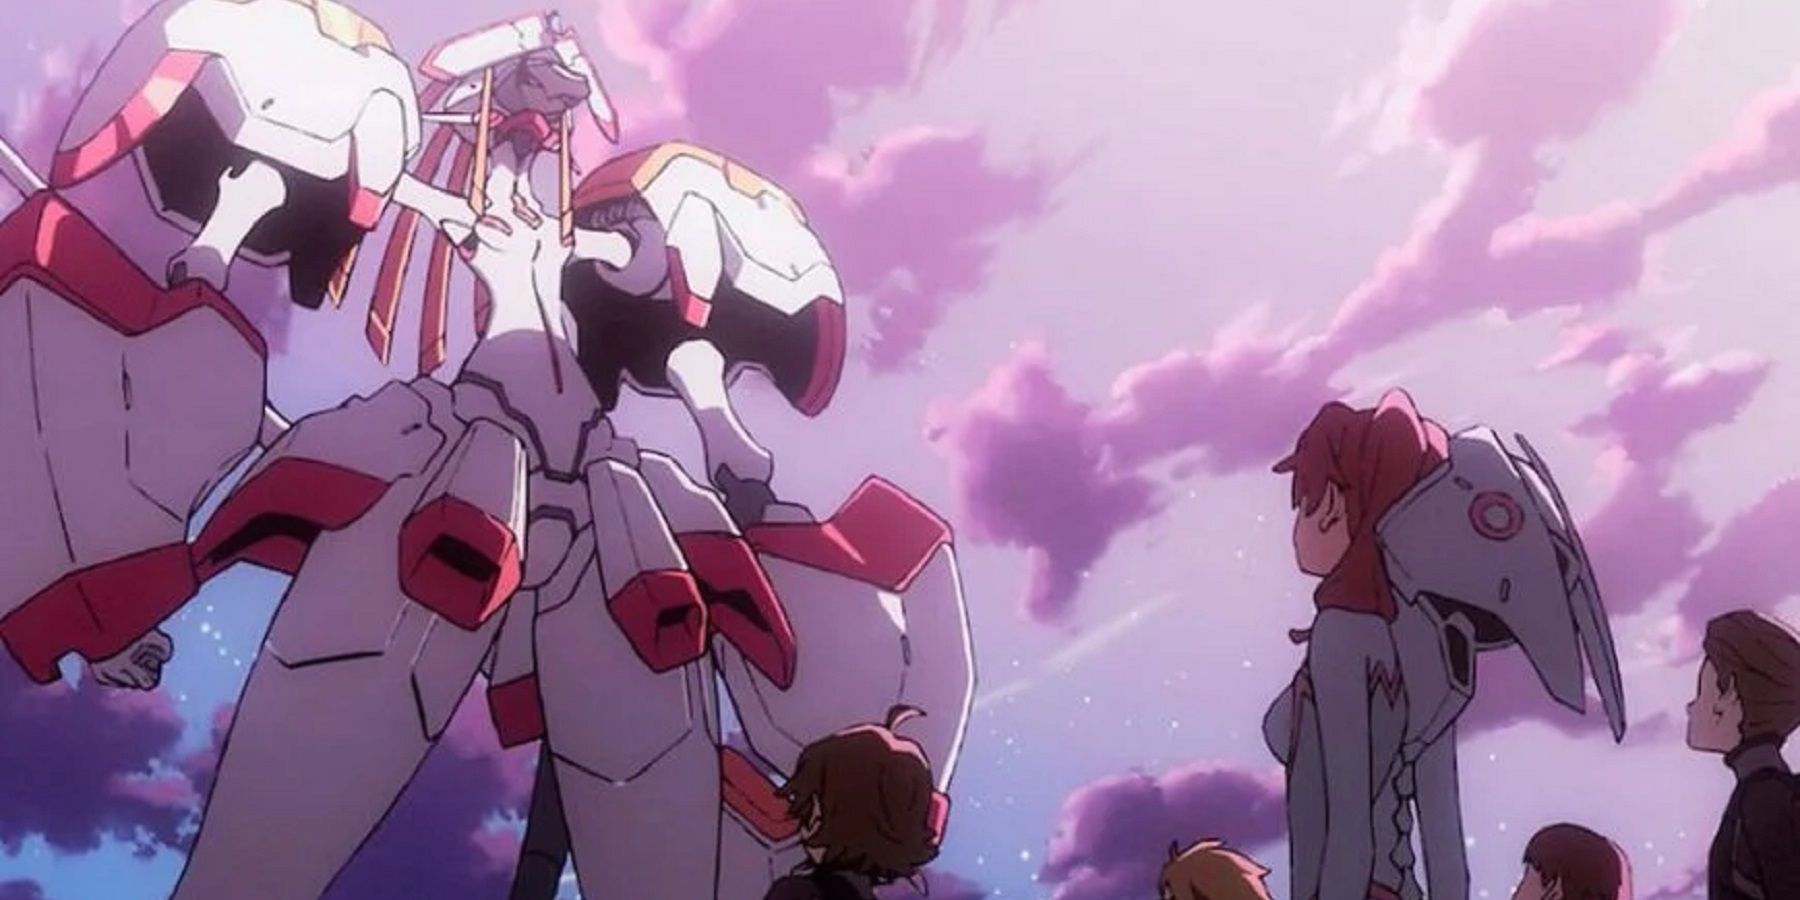 Why Was Darling in the Franxx's Ending So Controversial?